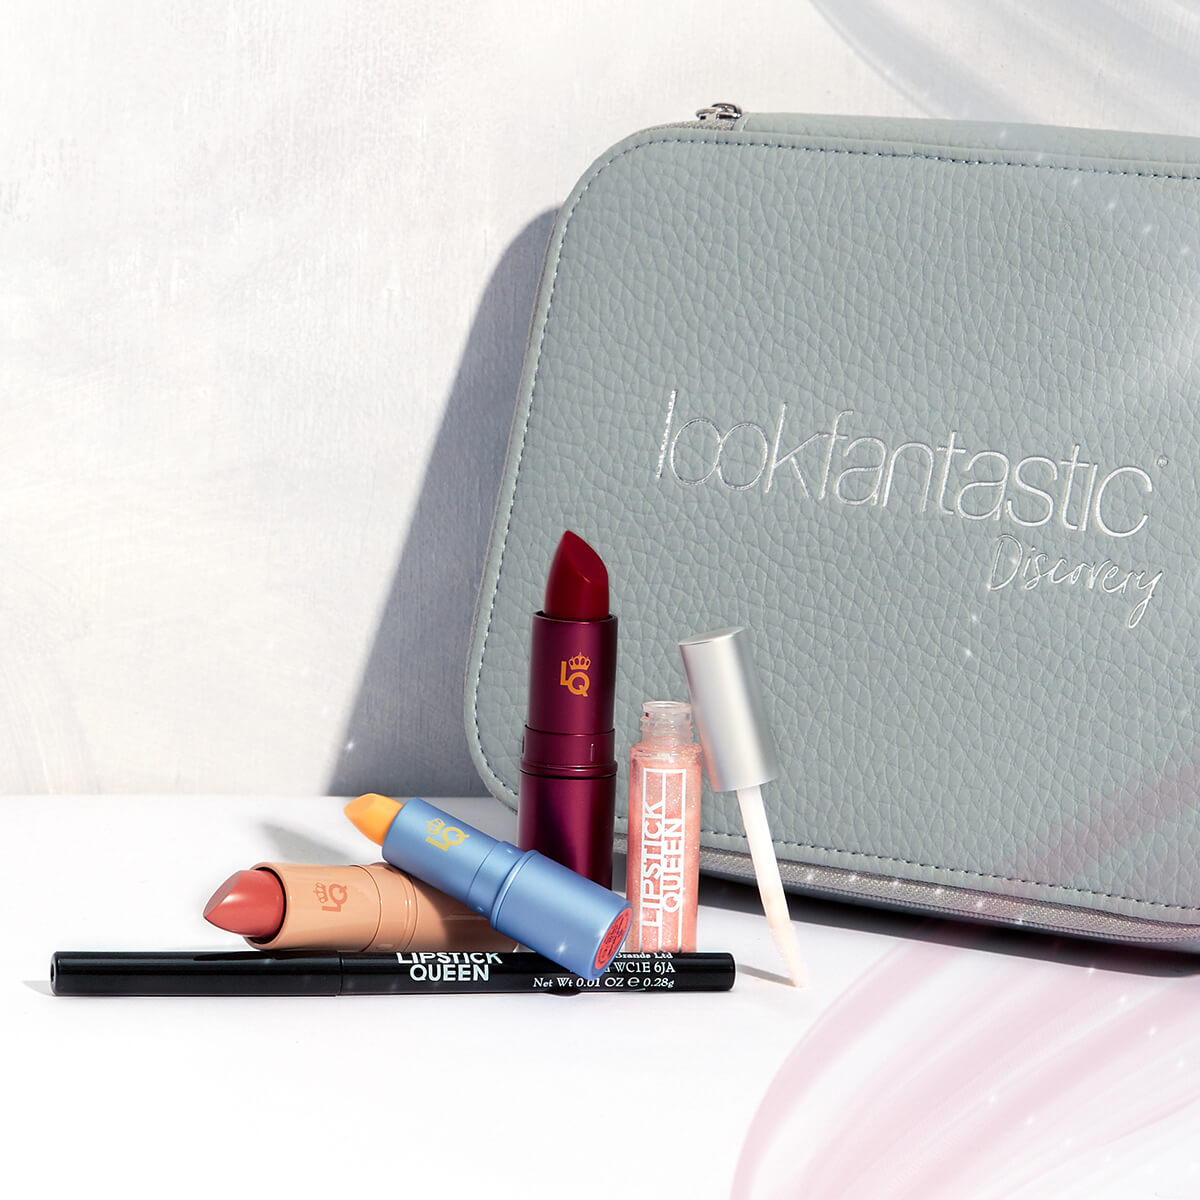 LipstickQueen lookfantastic Discovery Bag (Worth £80)